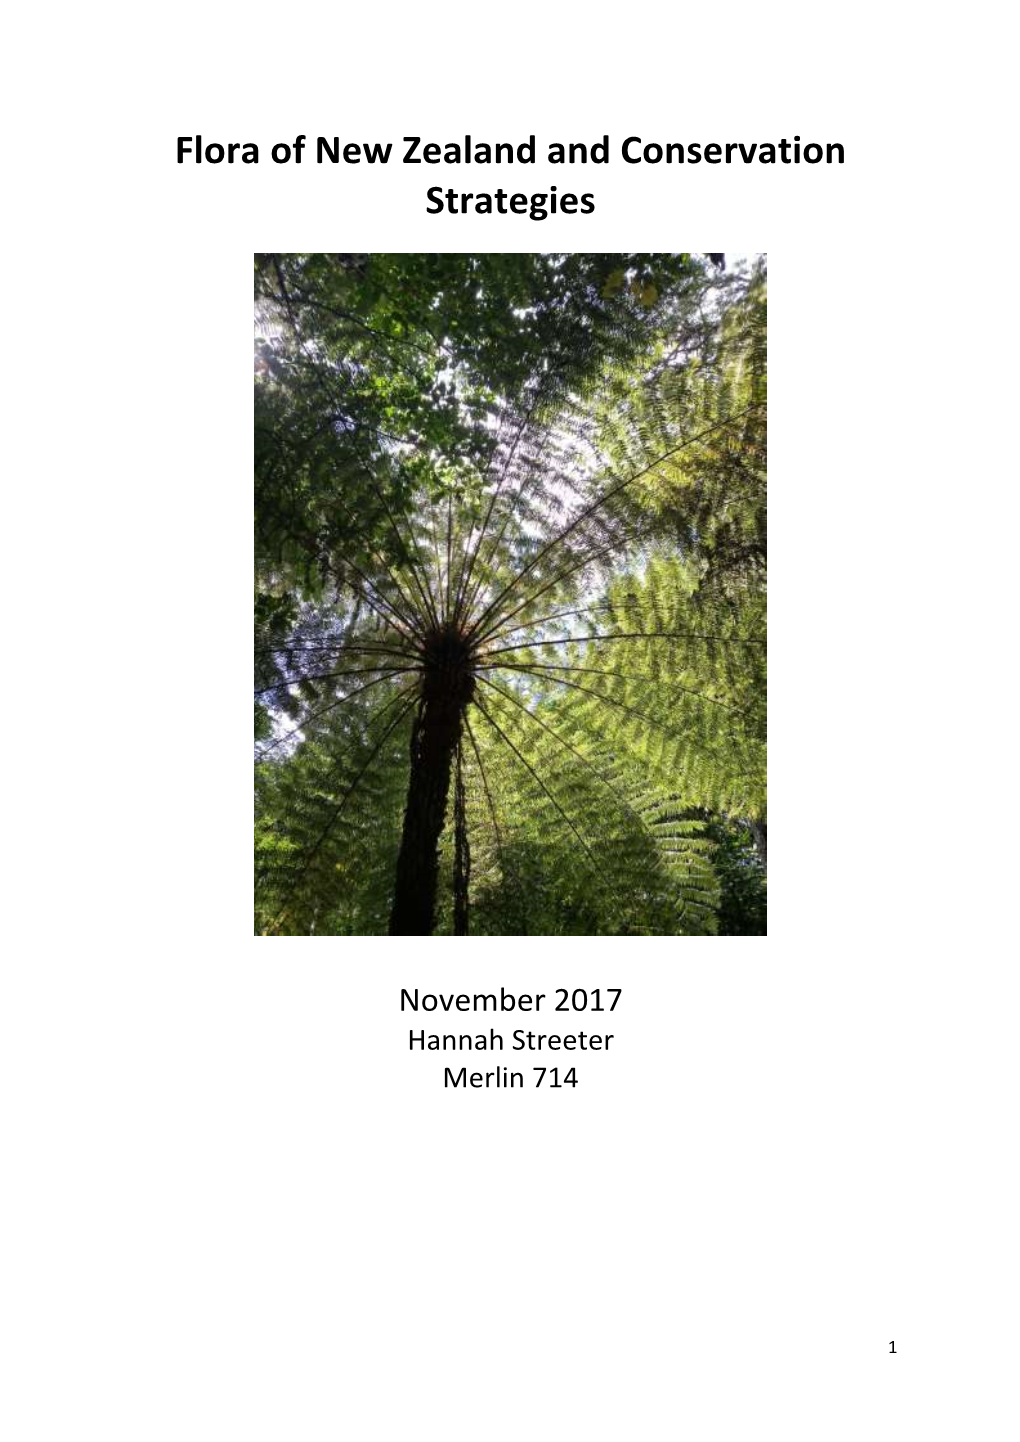 Flora of New Zealand and Conservation Strategies